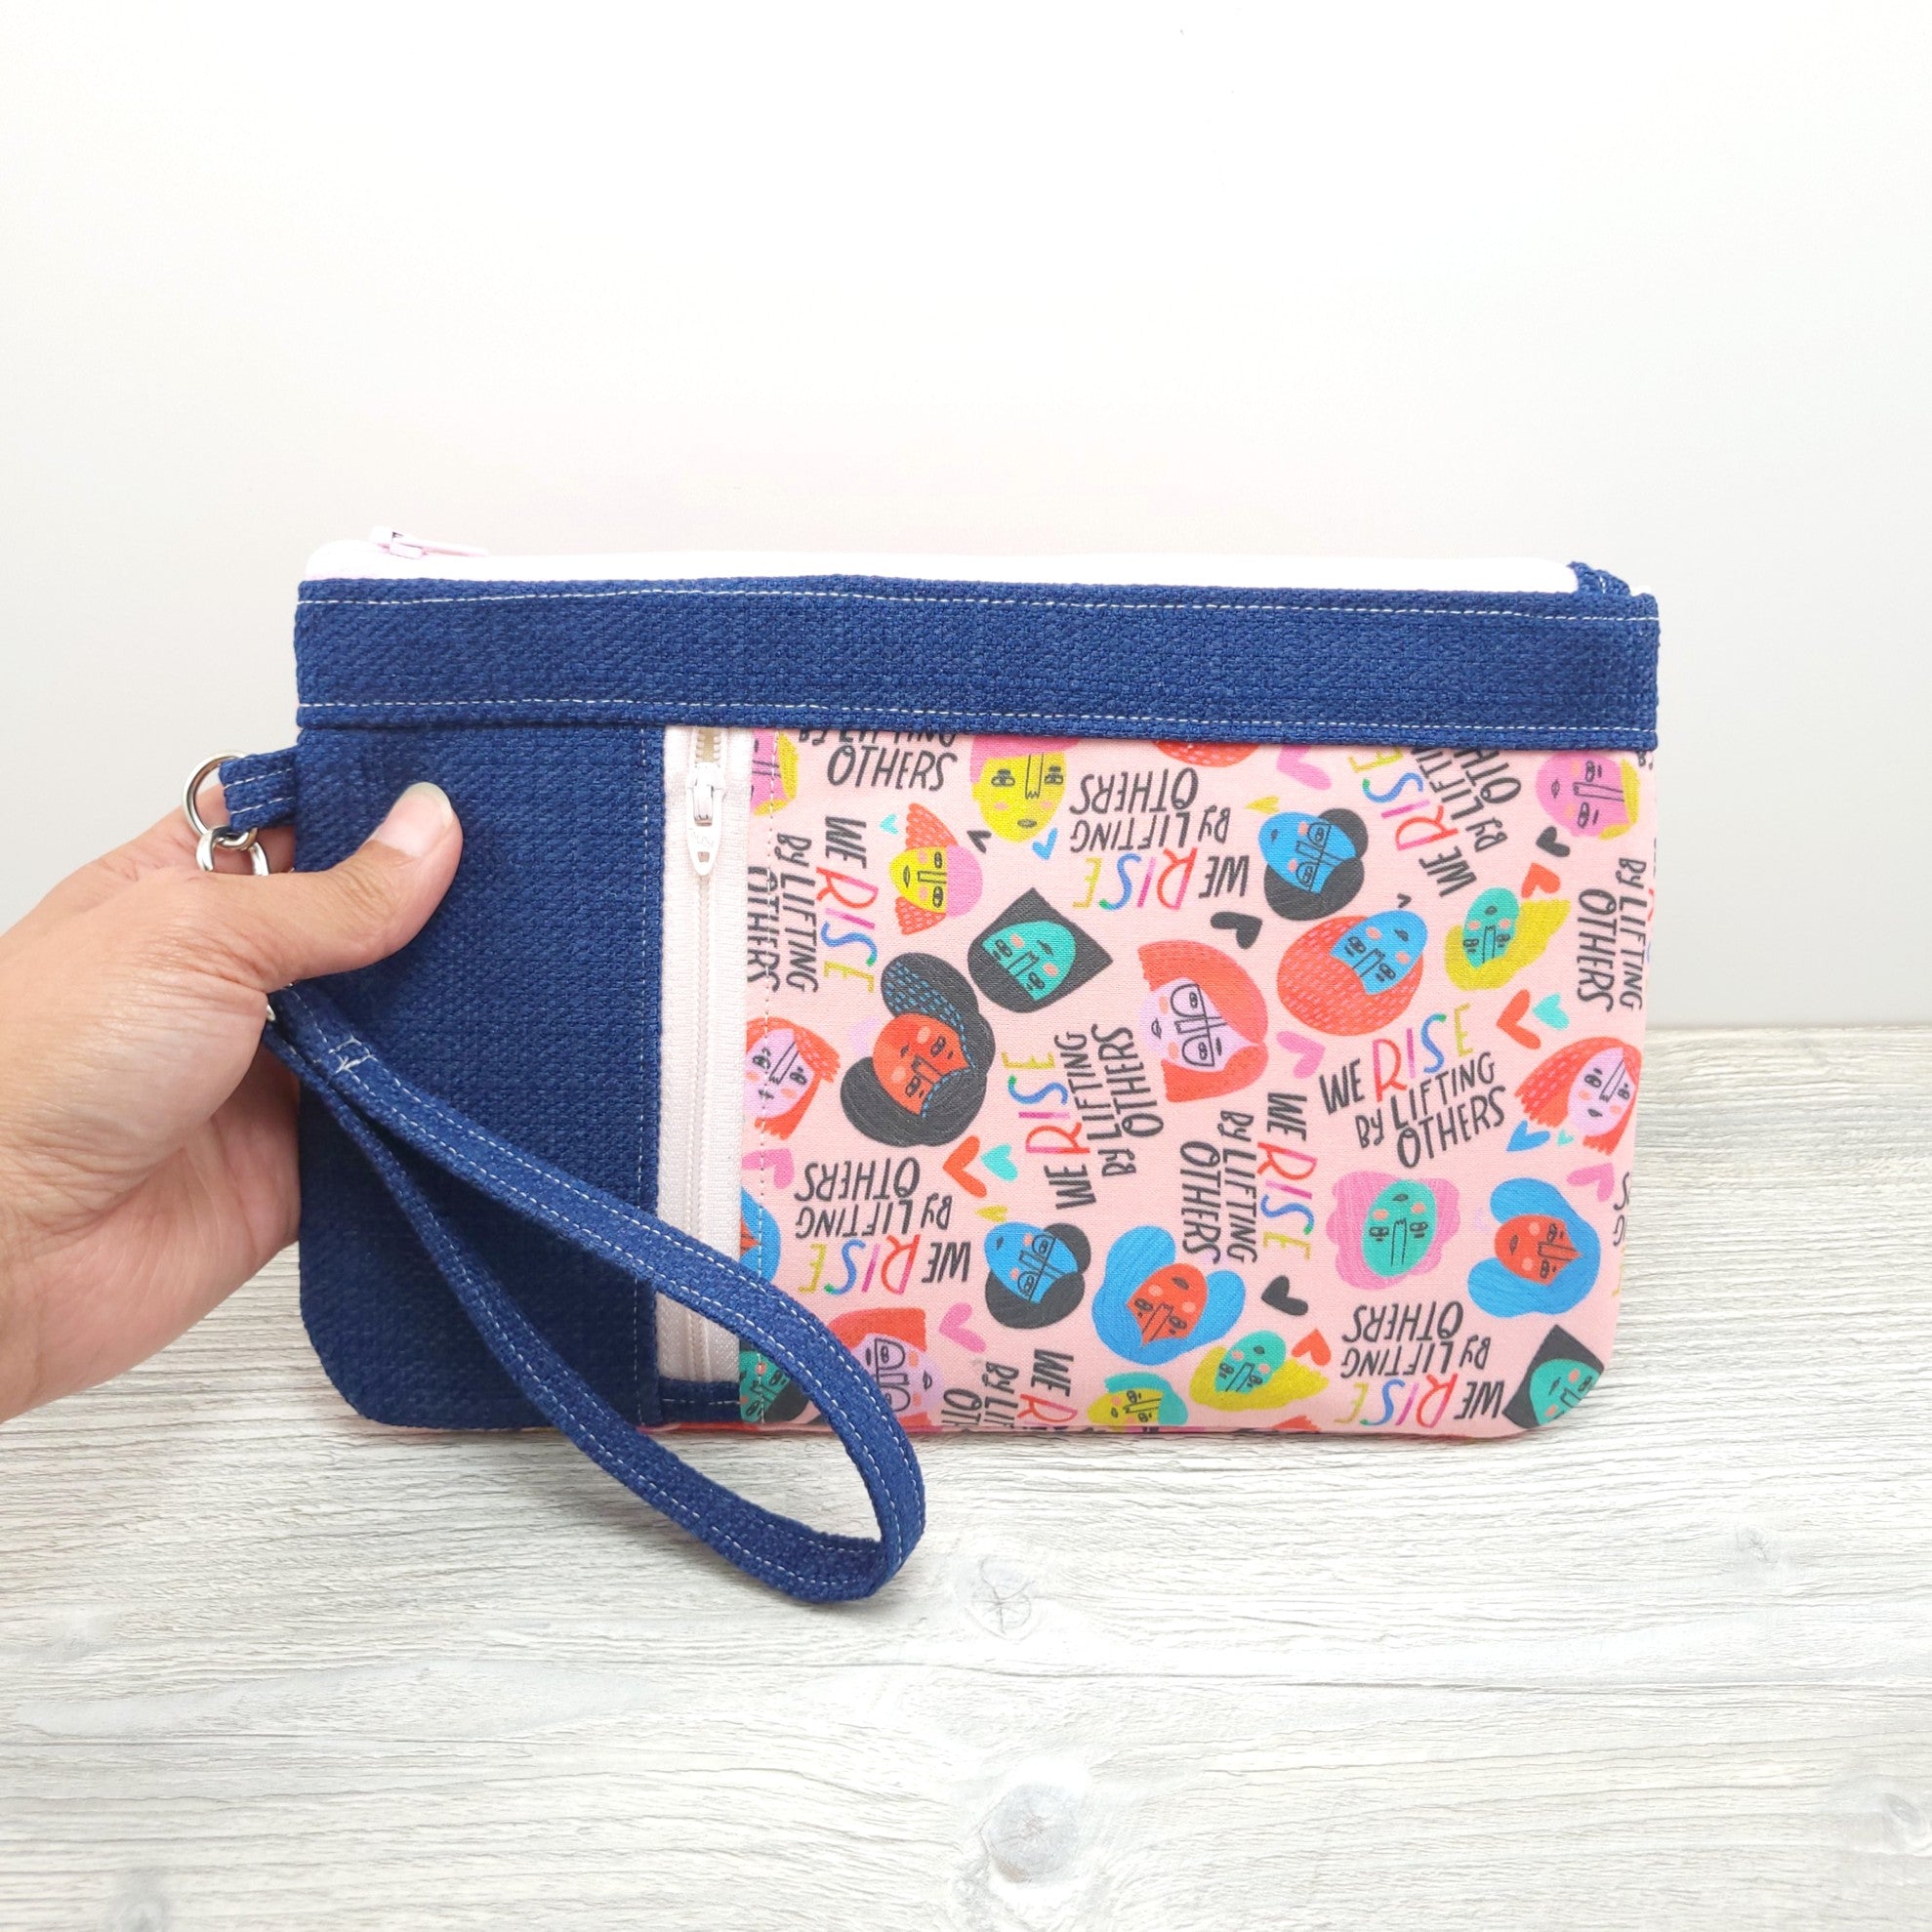 Wristlet with zipper and handle.